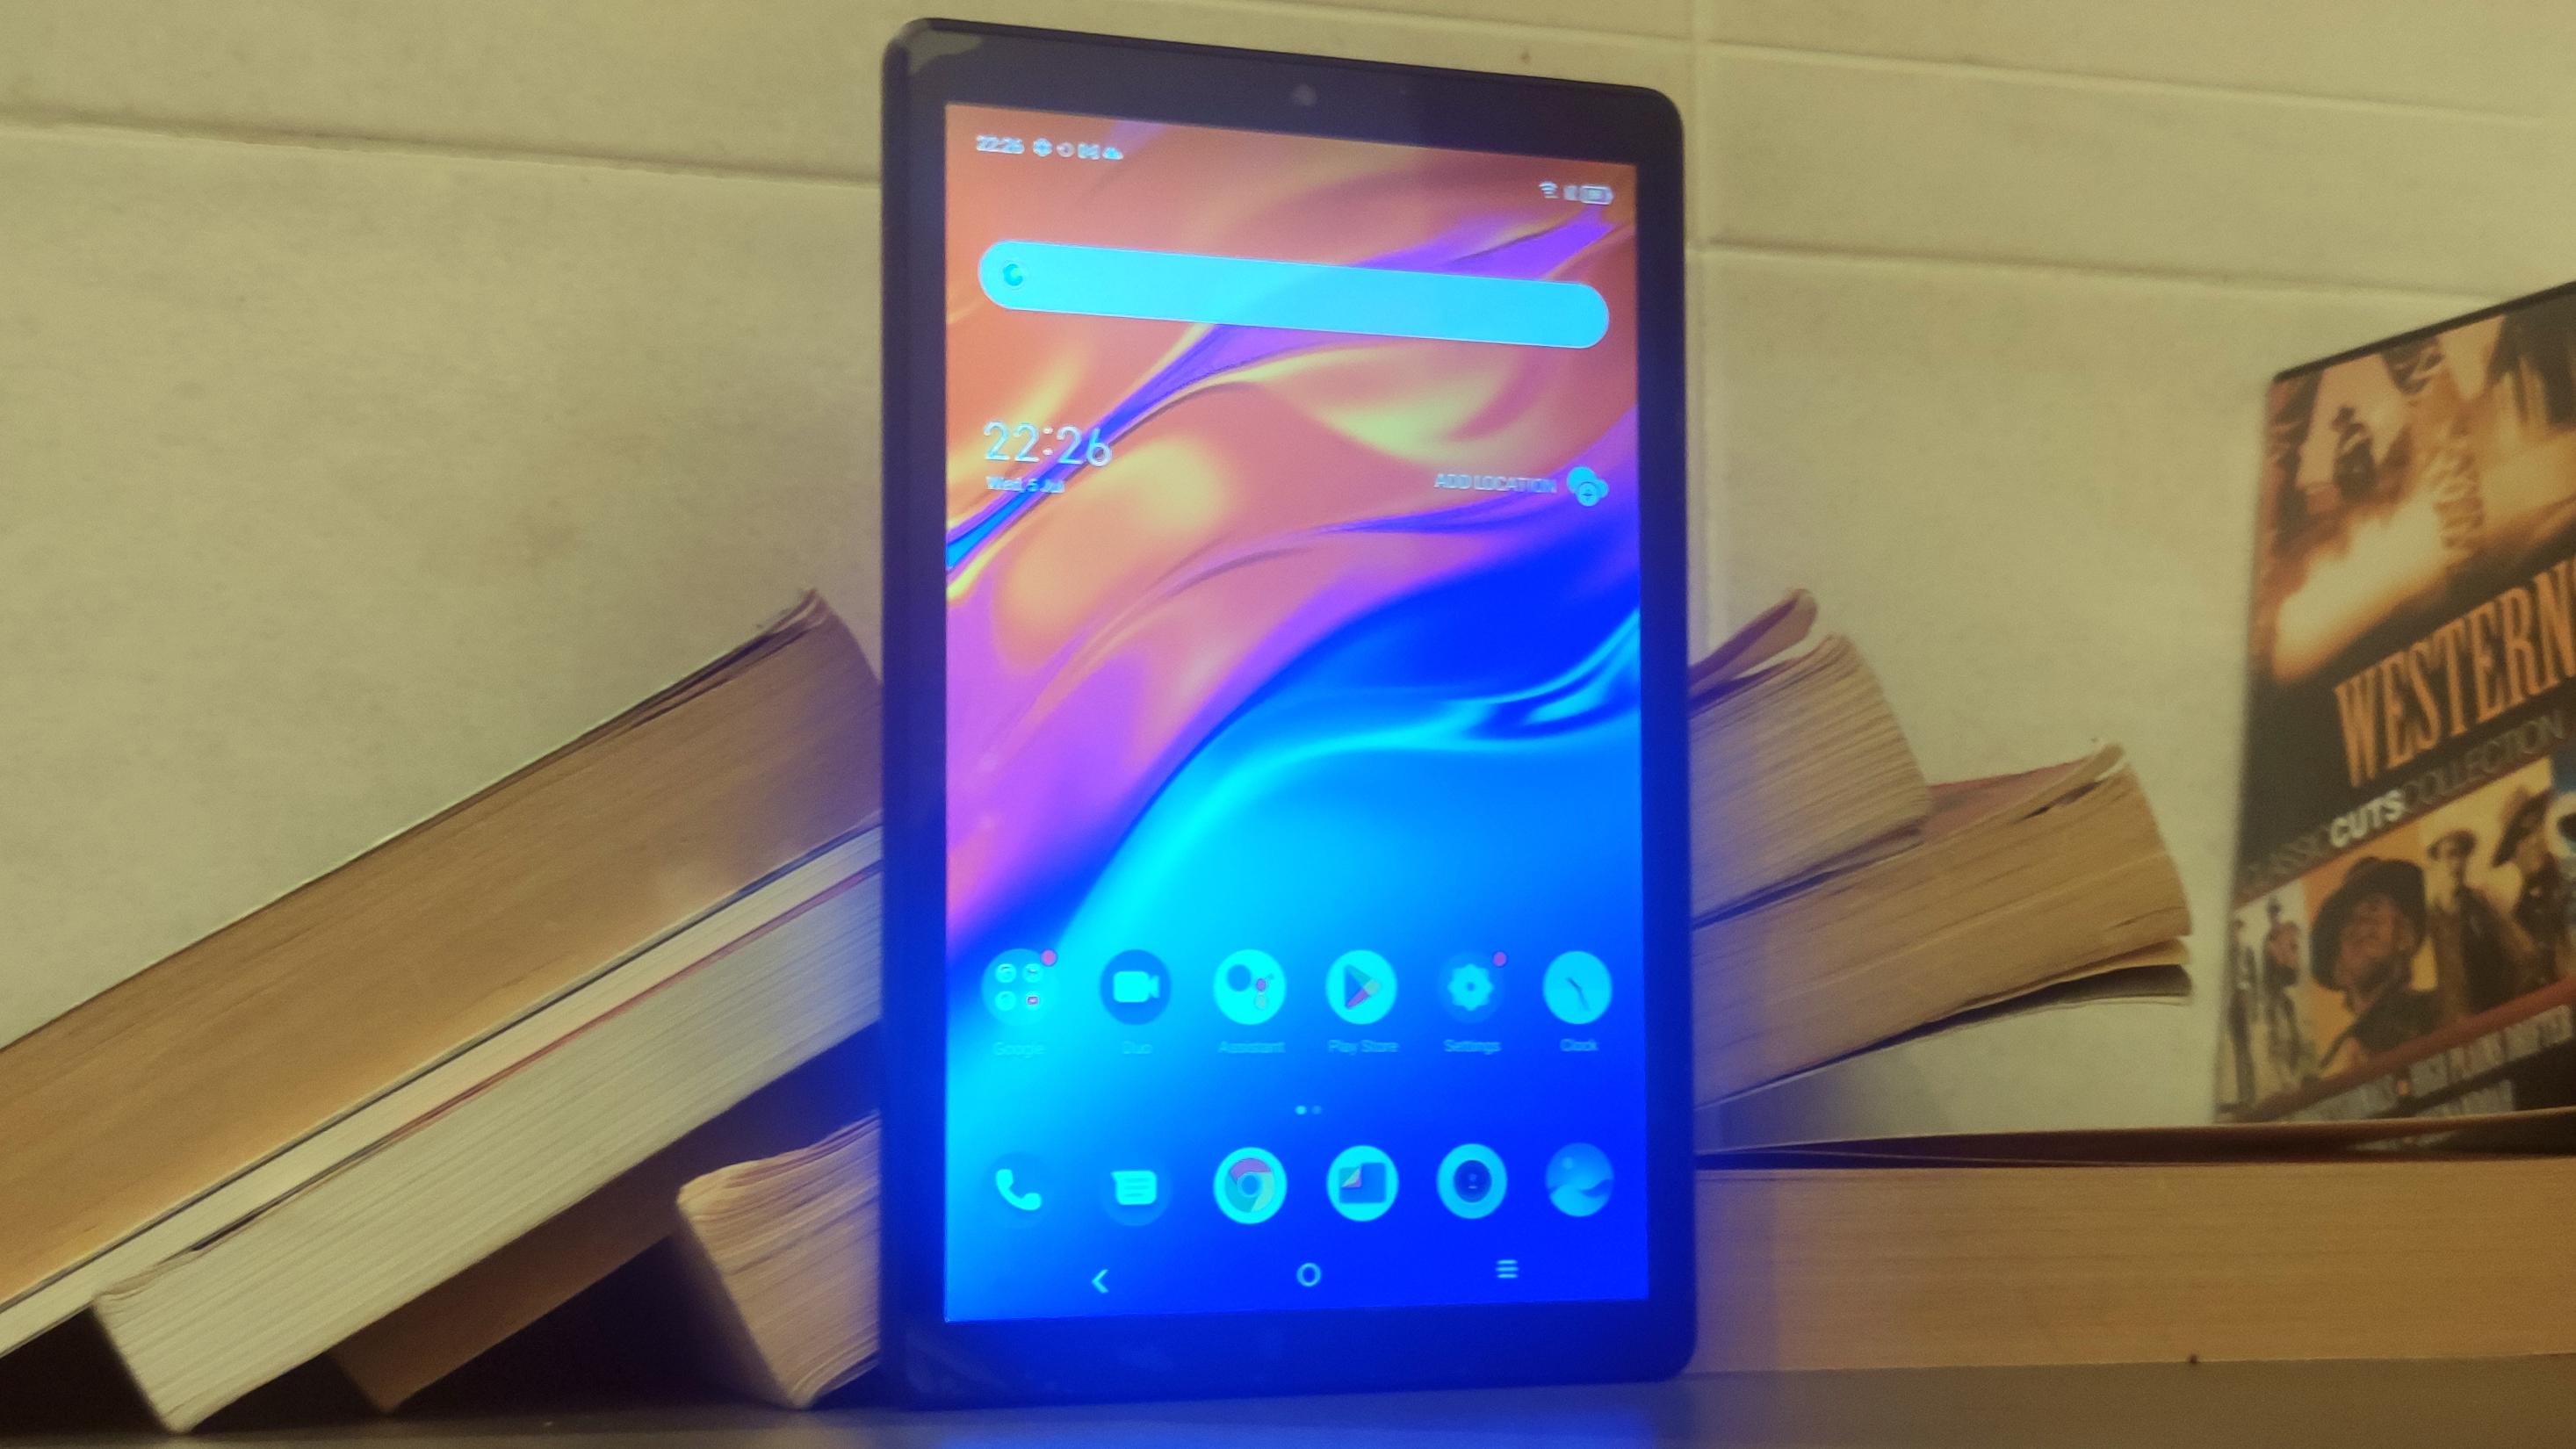 The TCL Tab 8 LE budget Android tablet